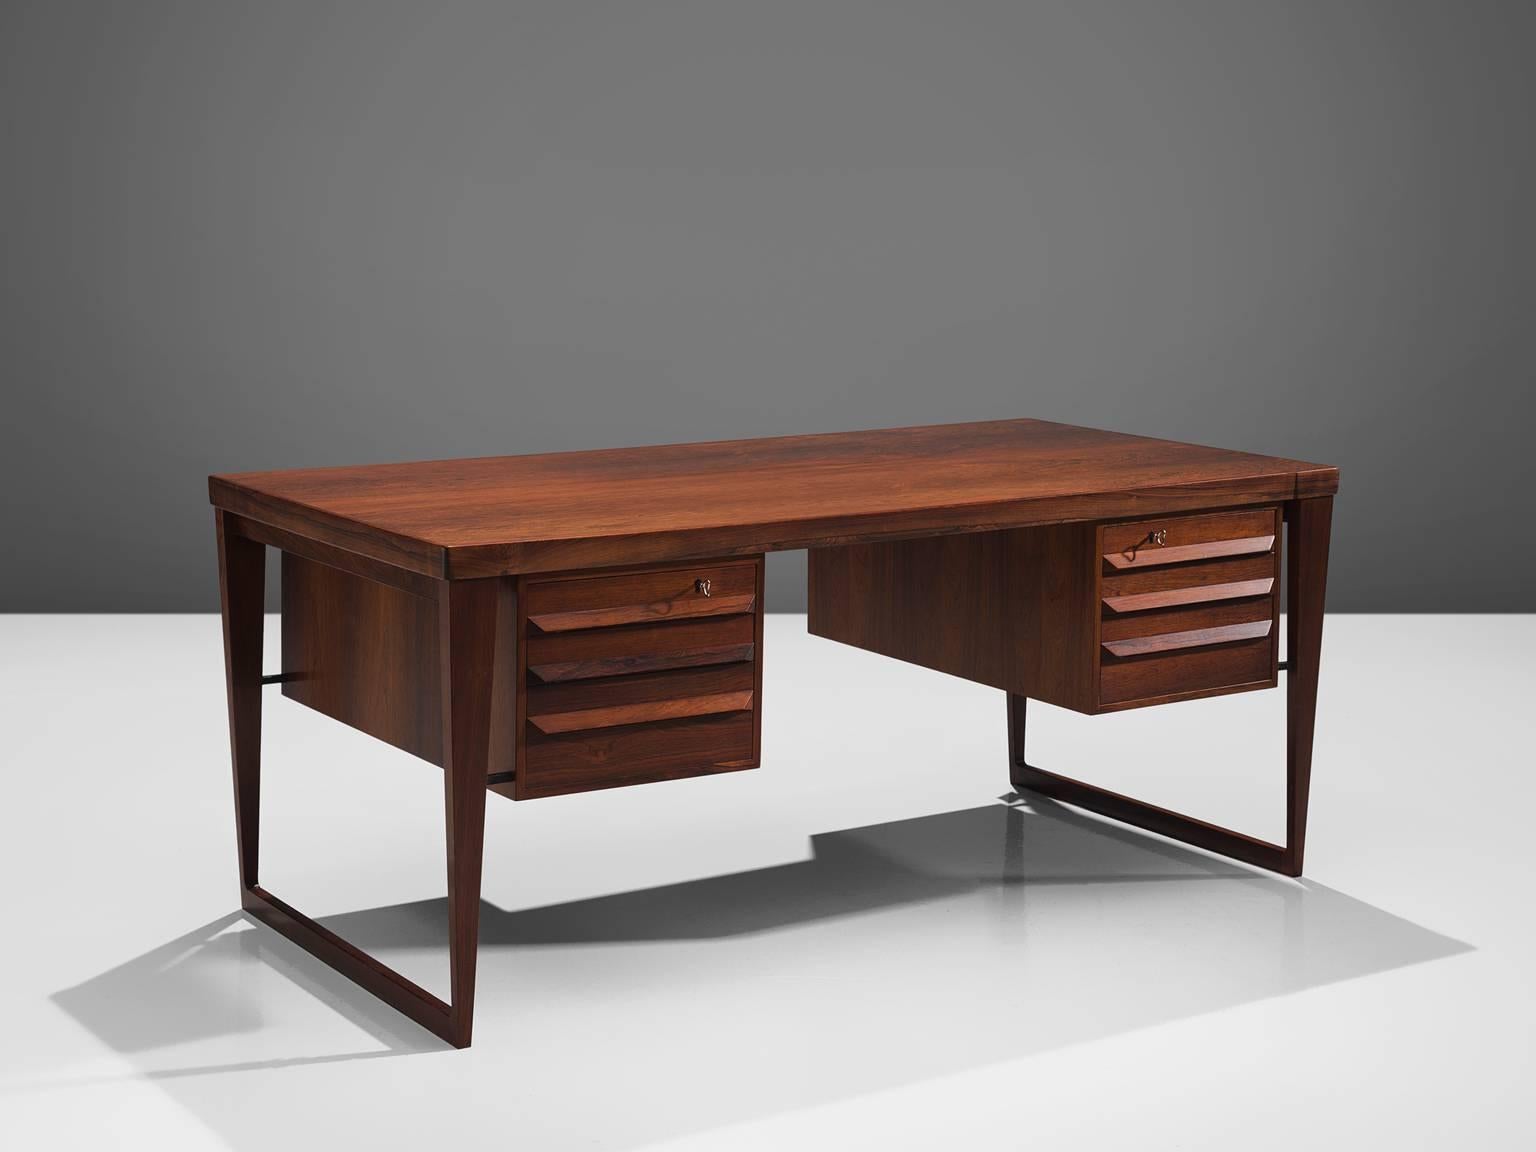 Kai Kristiansen for Feldballes Møbelfabrik, desk model 70, rosewood, Denmark, design 1958, production 1960s.

This sculptural freestanding desk is executed with two solid rosewood sled bases and contains three drawers on both sides which can be